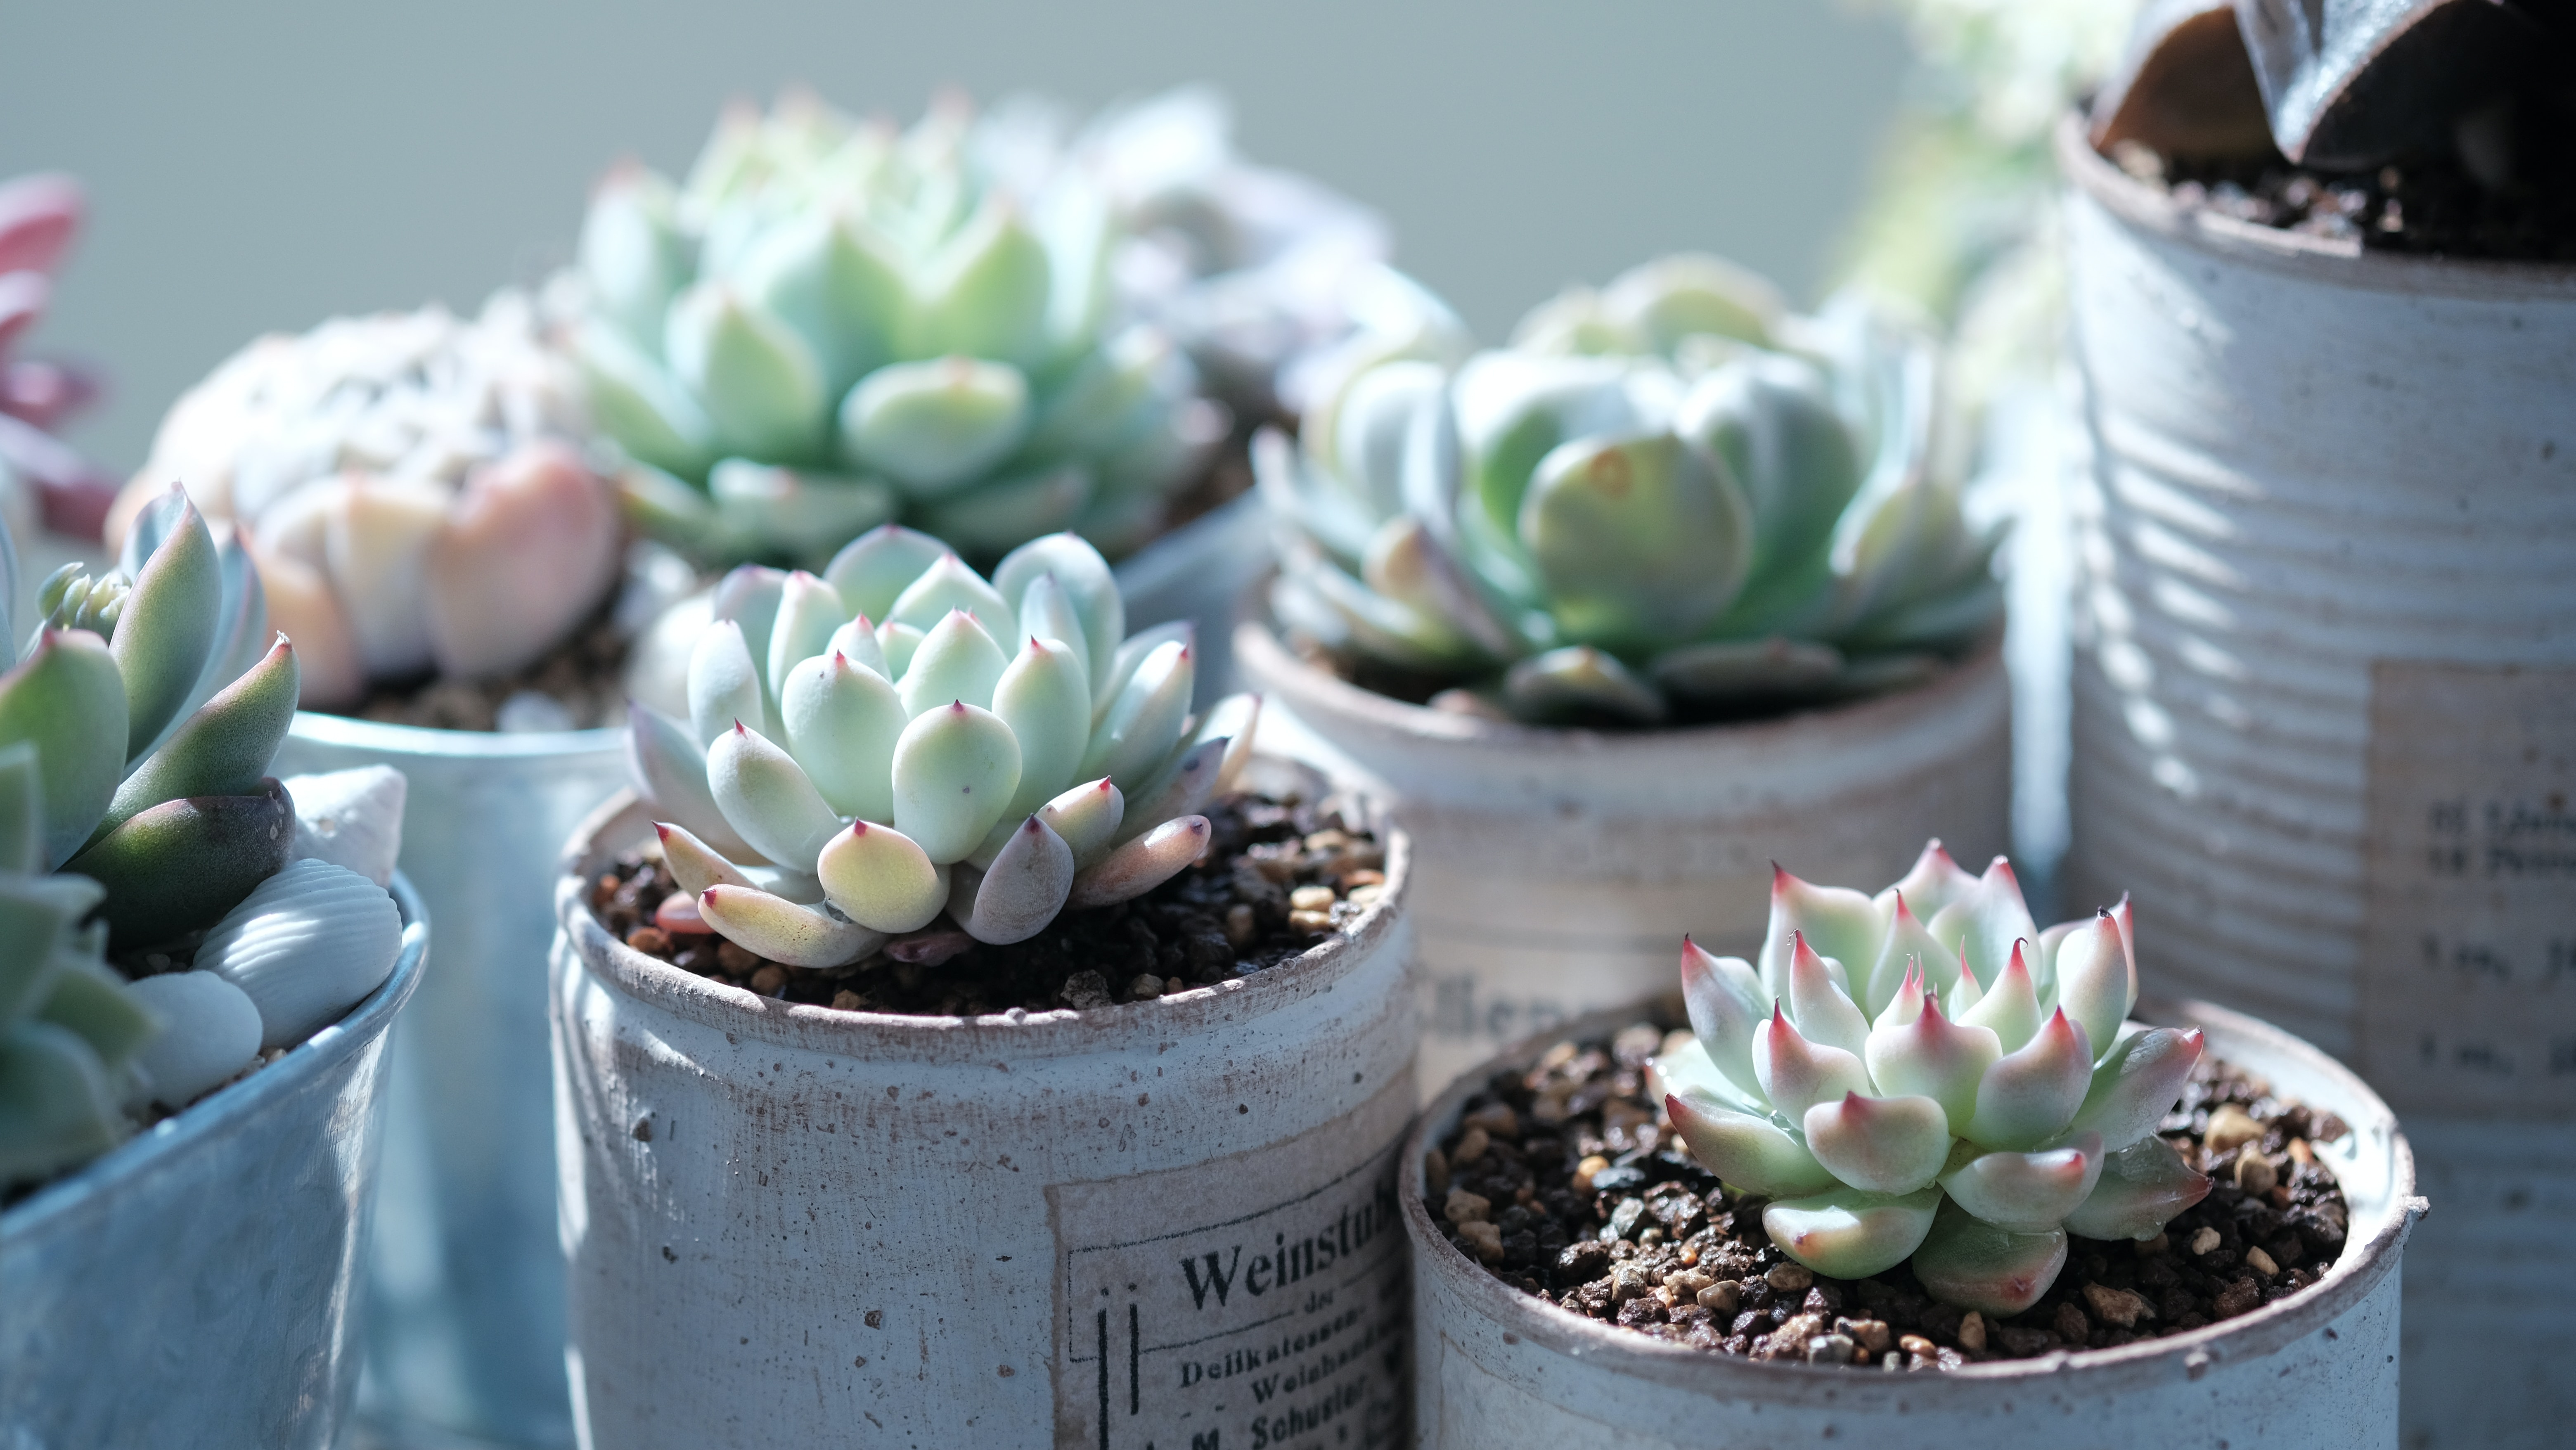 How to Tell If Your Succulents Are Happy - Succulents Box